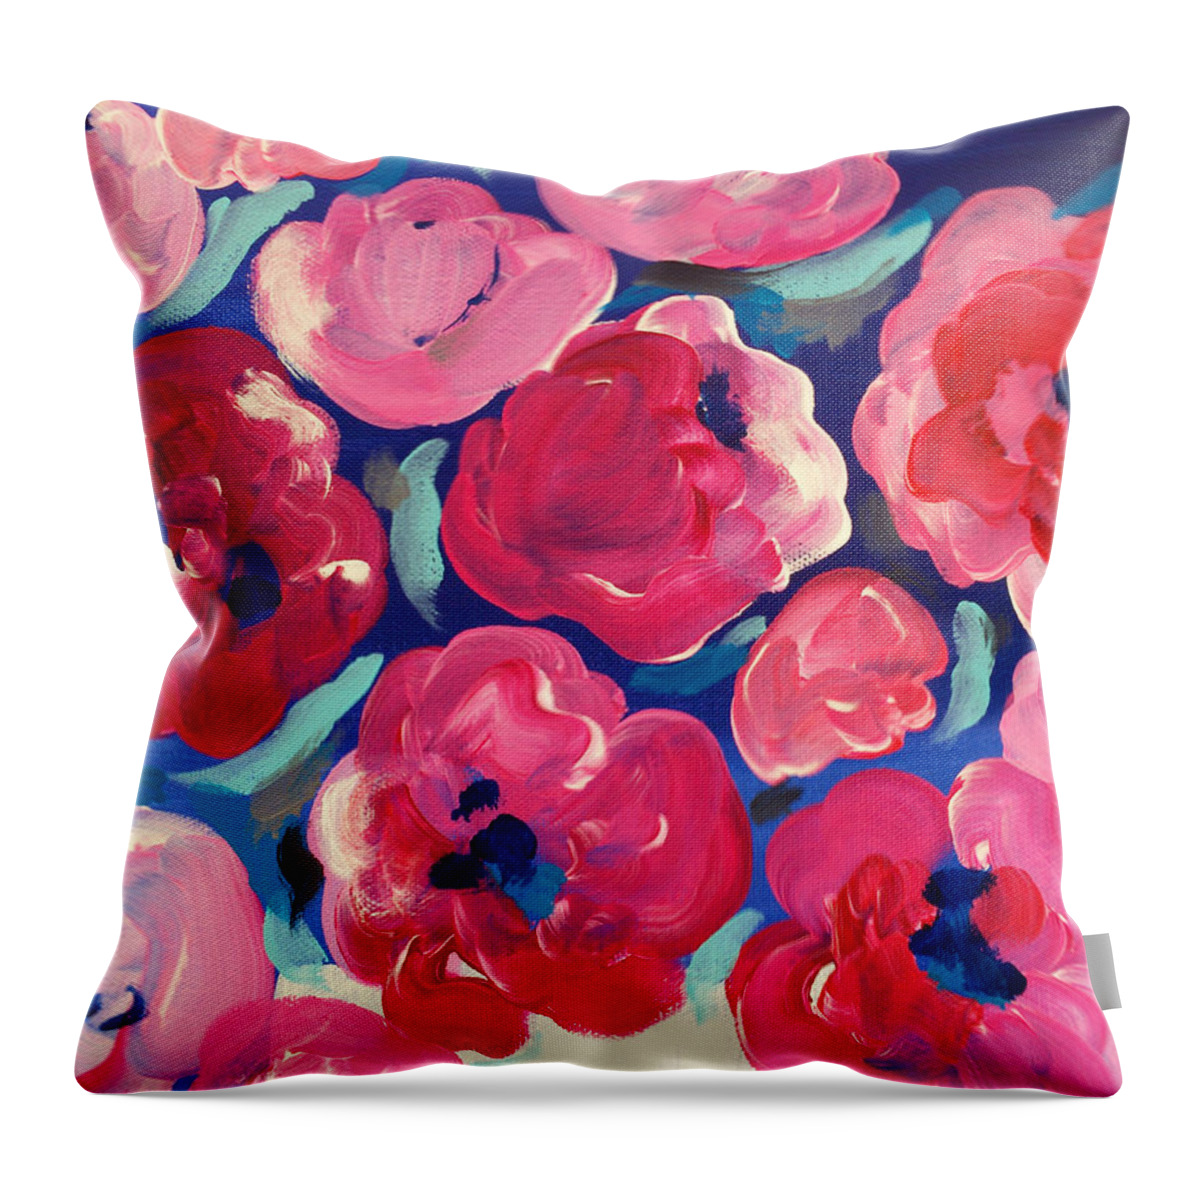 Floral Art Throw Pillow featuring the painting Love by Beth Ann Scott